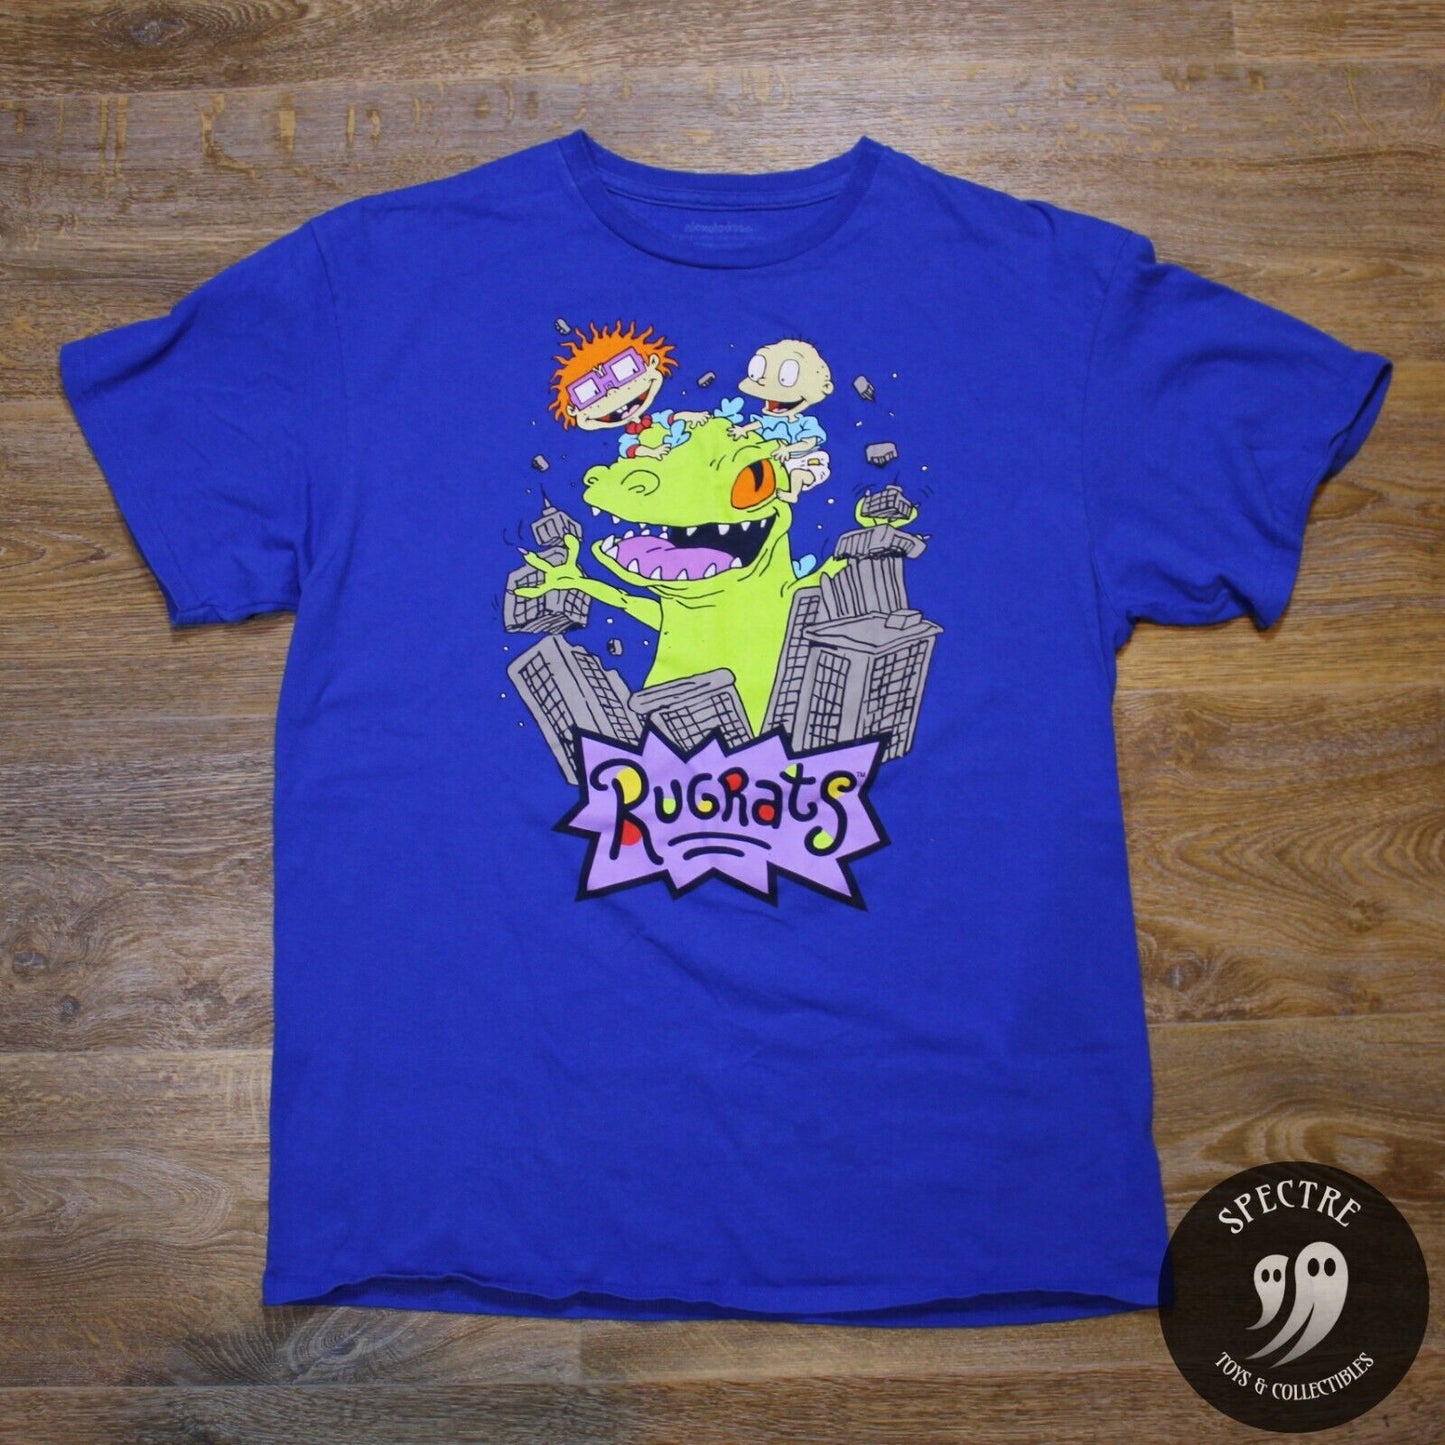 Rugrats Reptar Destroying Buildings T Shirt Nickelodeon Blue- Men's Size Large